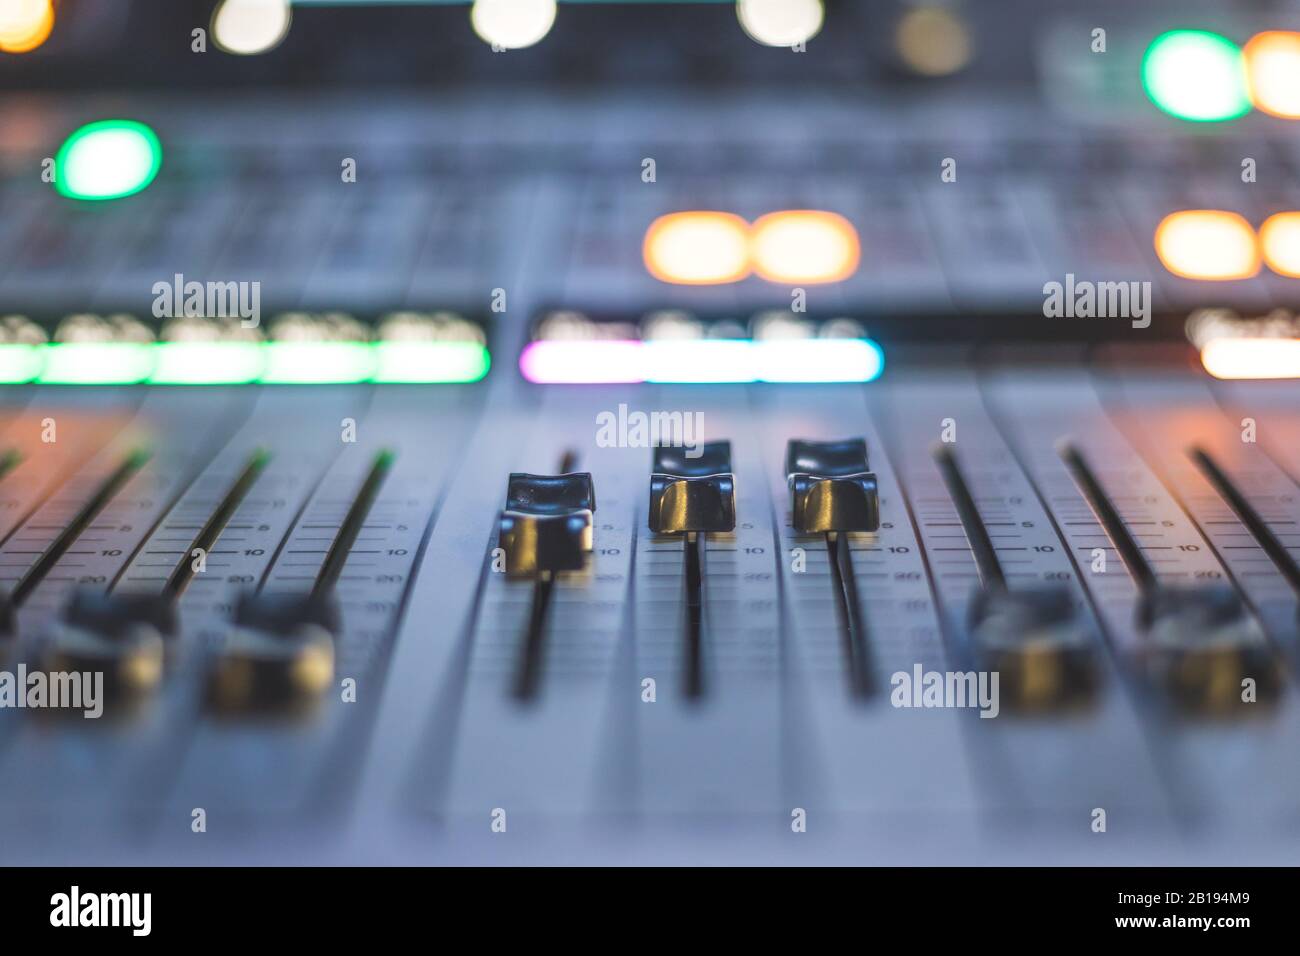 Professional Music Production In A Sound Recording Studio Mixer